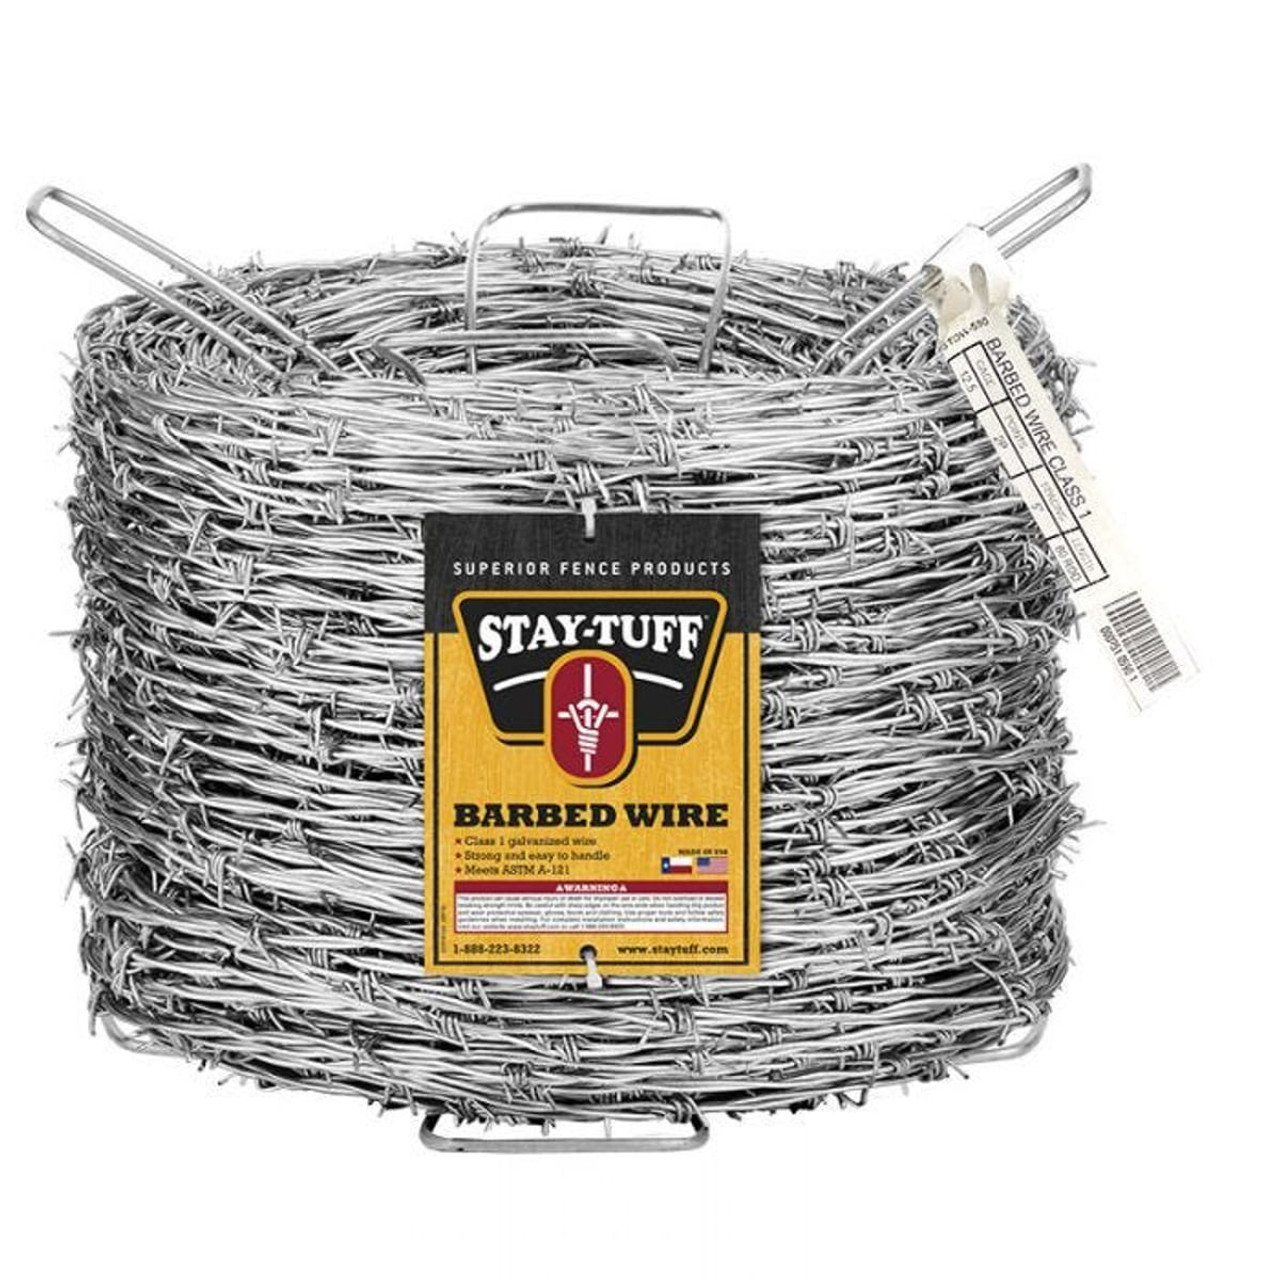 STDW-573 Barbed Wire, 1320 ft L, 15.5 ga, High-Tensile Barb, 3 in Points Spacing, Zinc